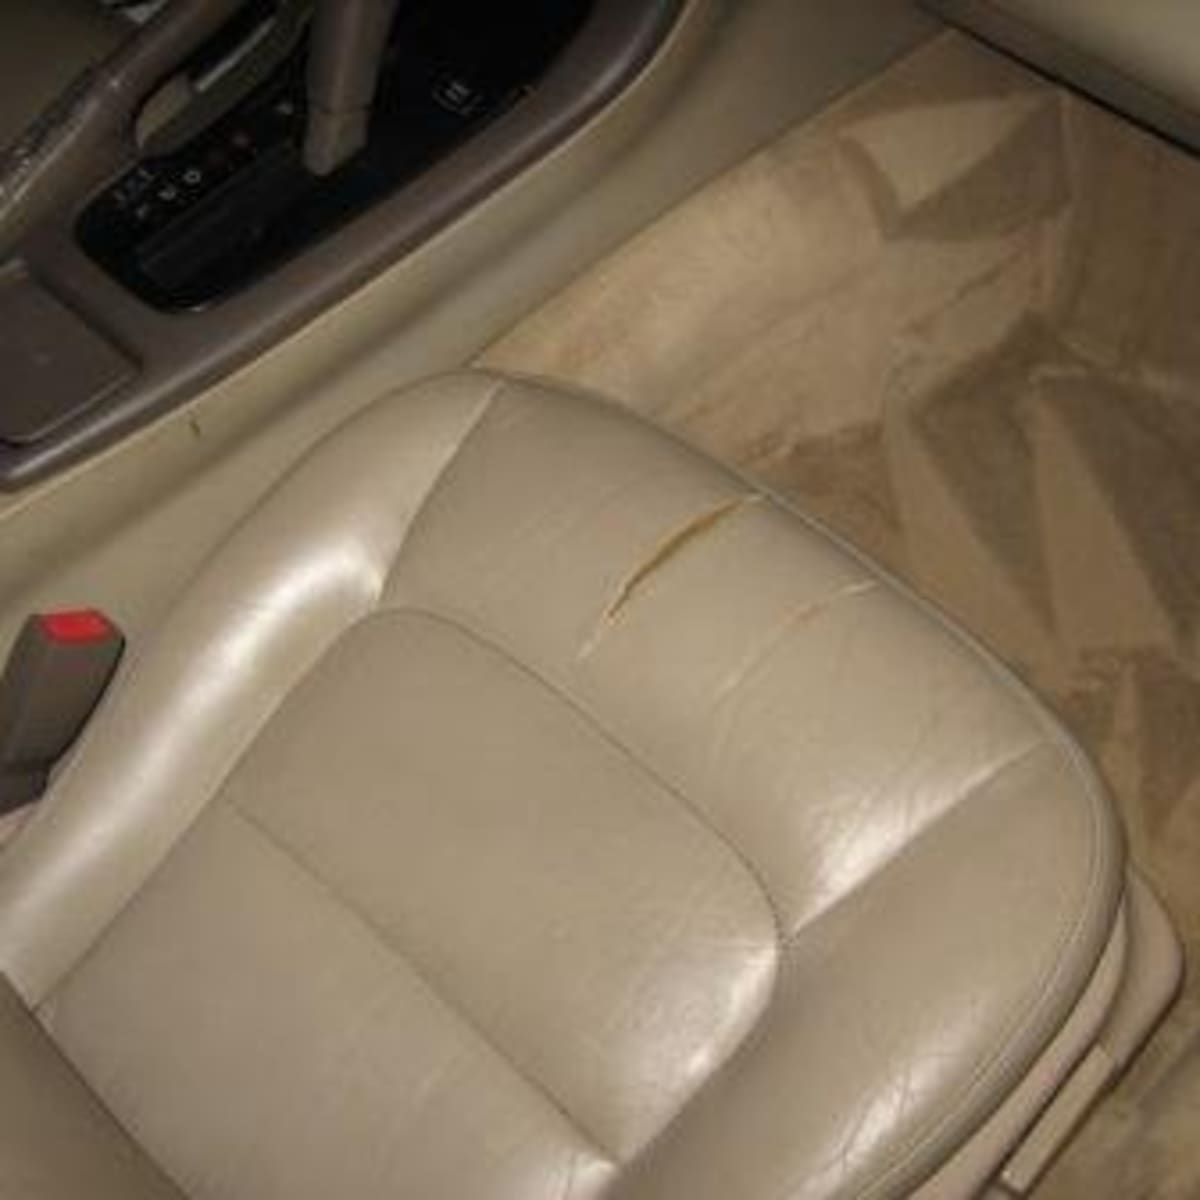 How To Repair Leather And Vinyl Car Seats Yourself Axleaddict - How Much To Replace Car Seats With Leather